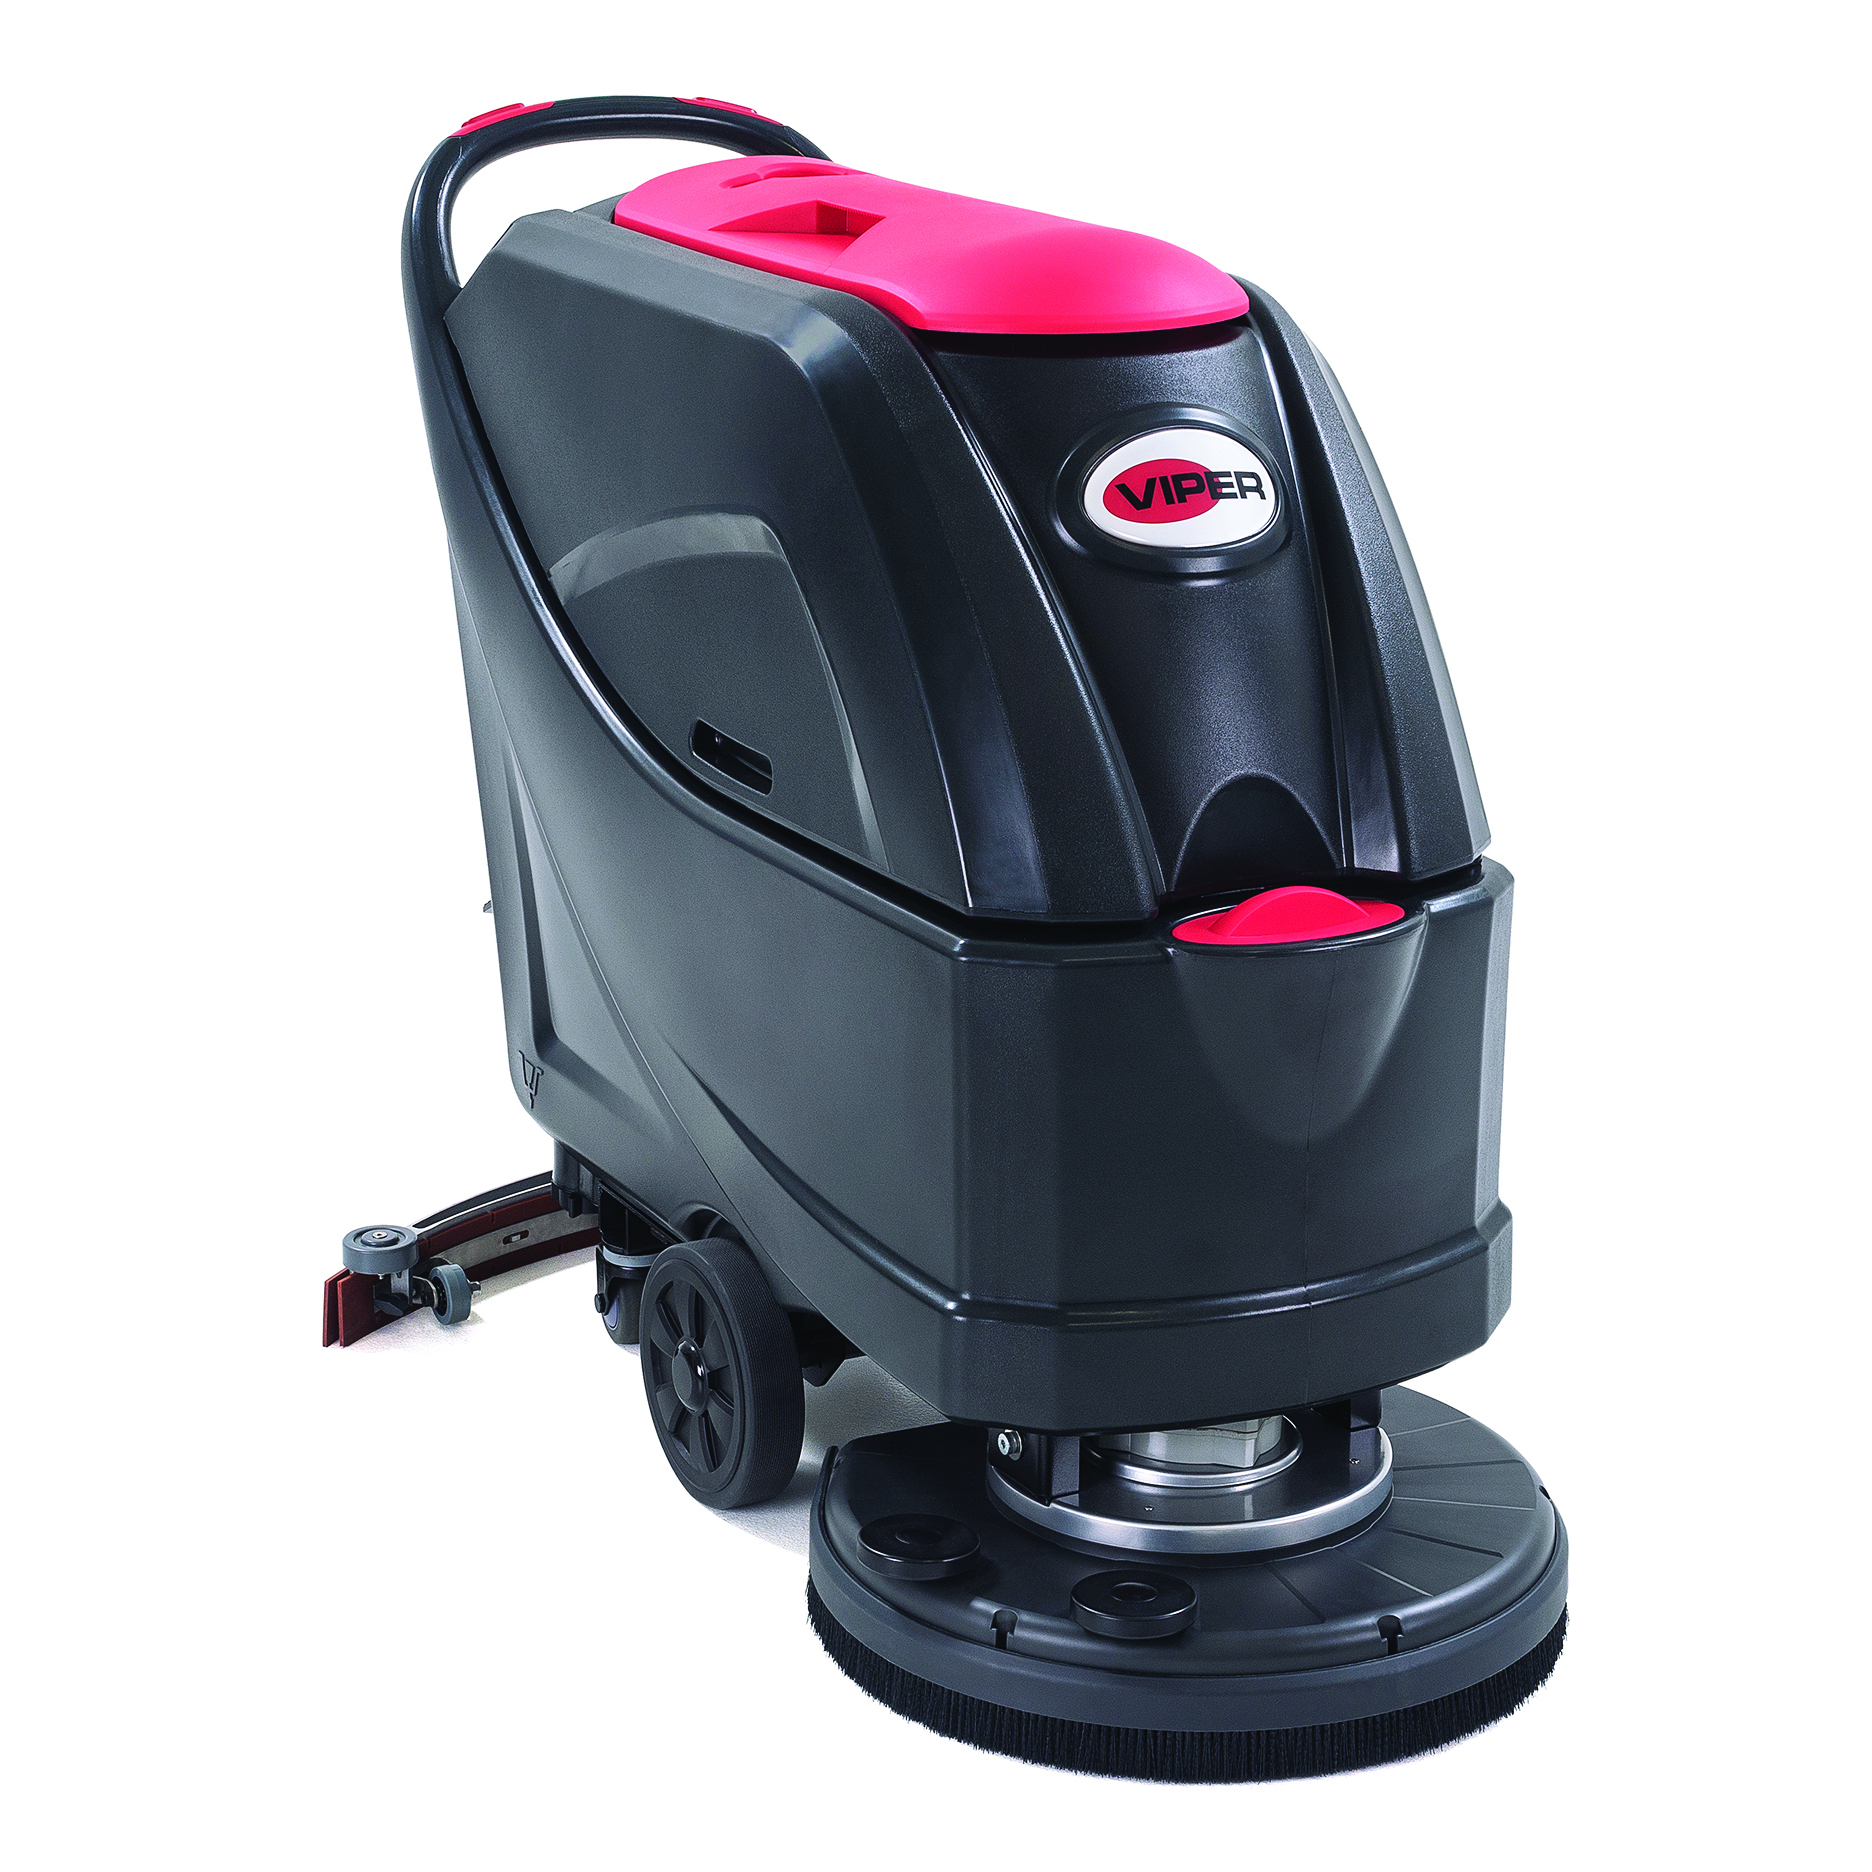 AS5160 Viper 20&quot; auto scrubber
16-gal, pad-assist drive, pad
driver, 31&quot; squeegee
assembly, 10-amp charger, 130
a/h WET batteries